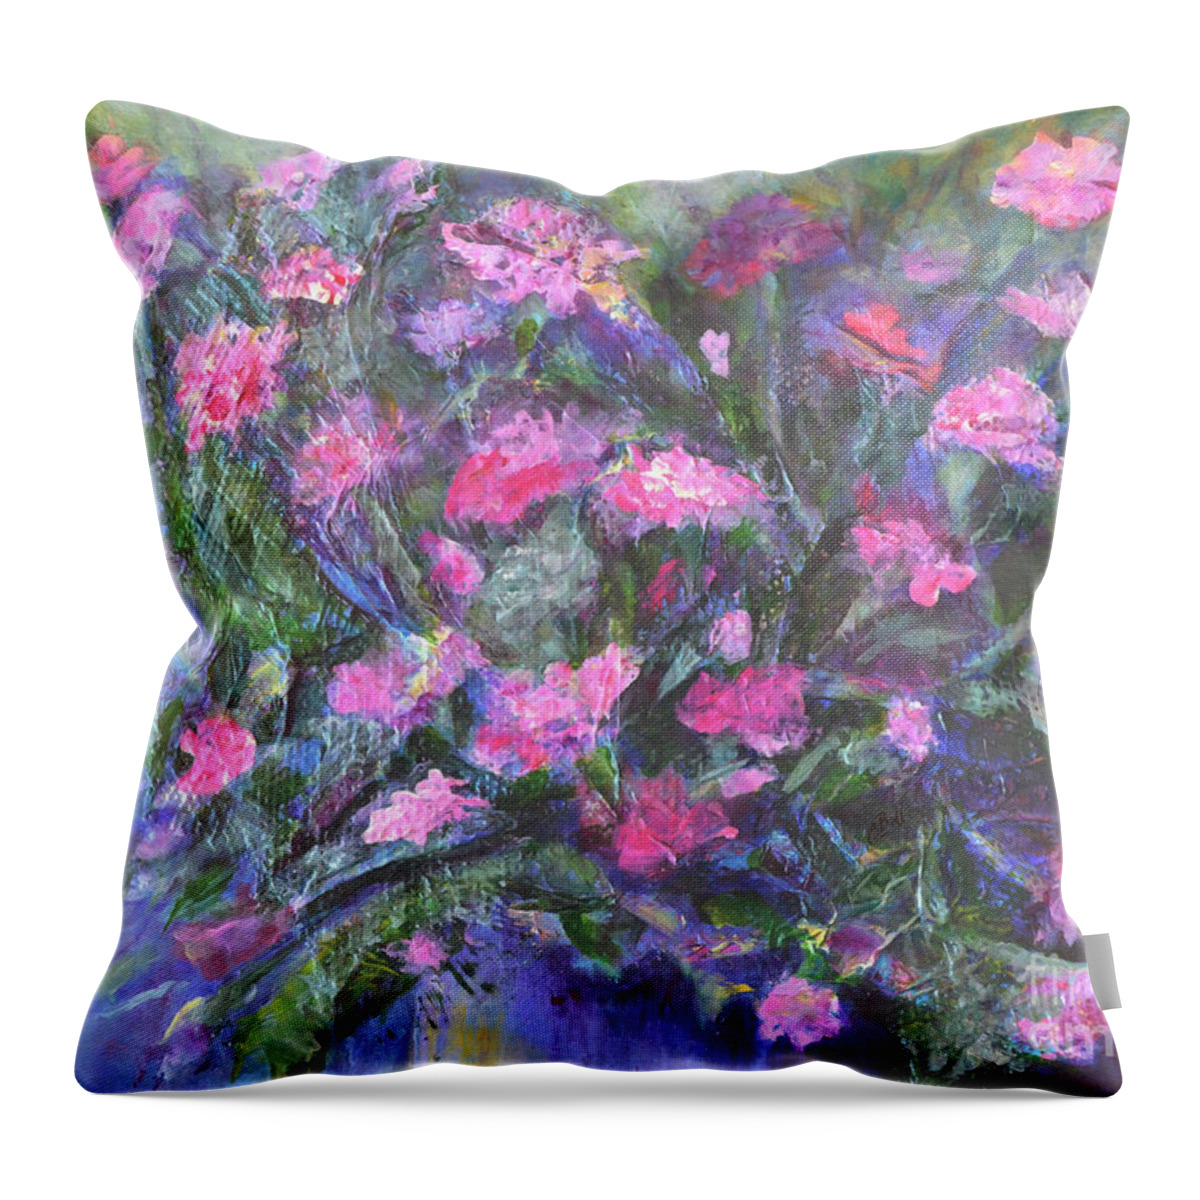 Carnations Throw Pillow featuring the painting Carnations by Claire Bull